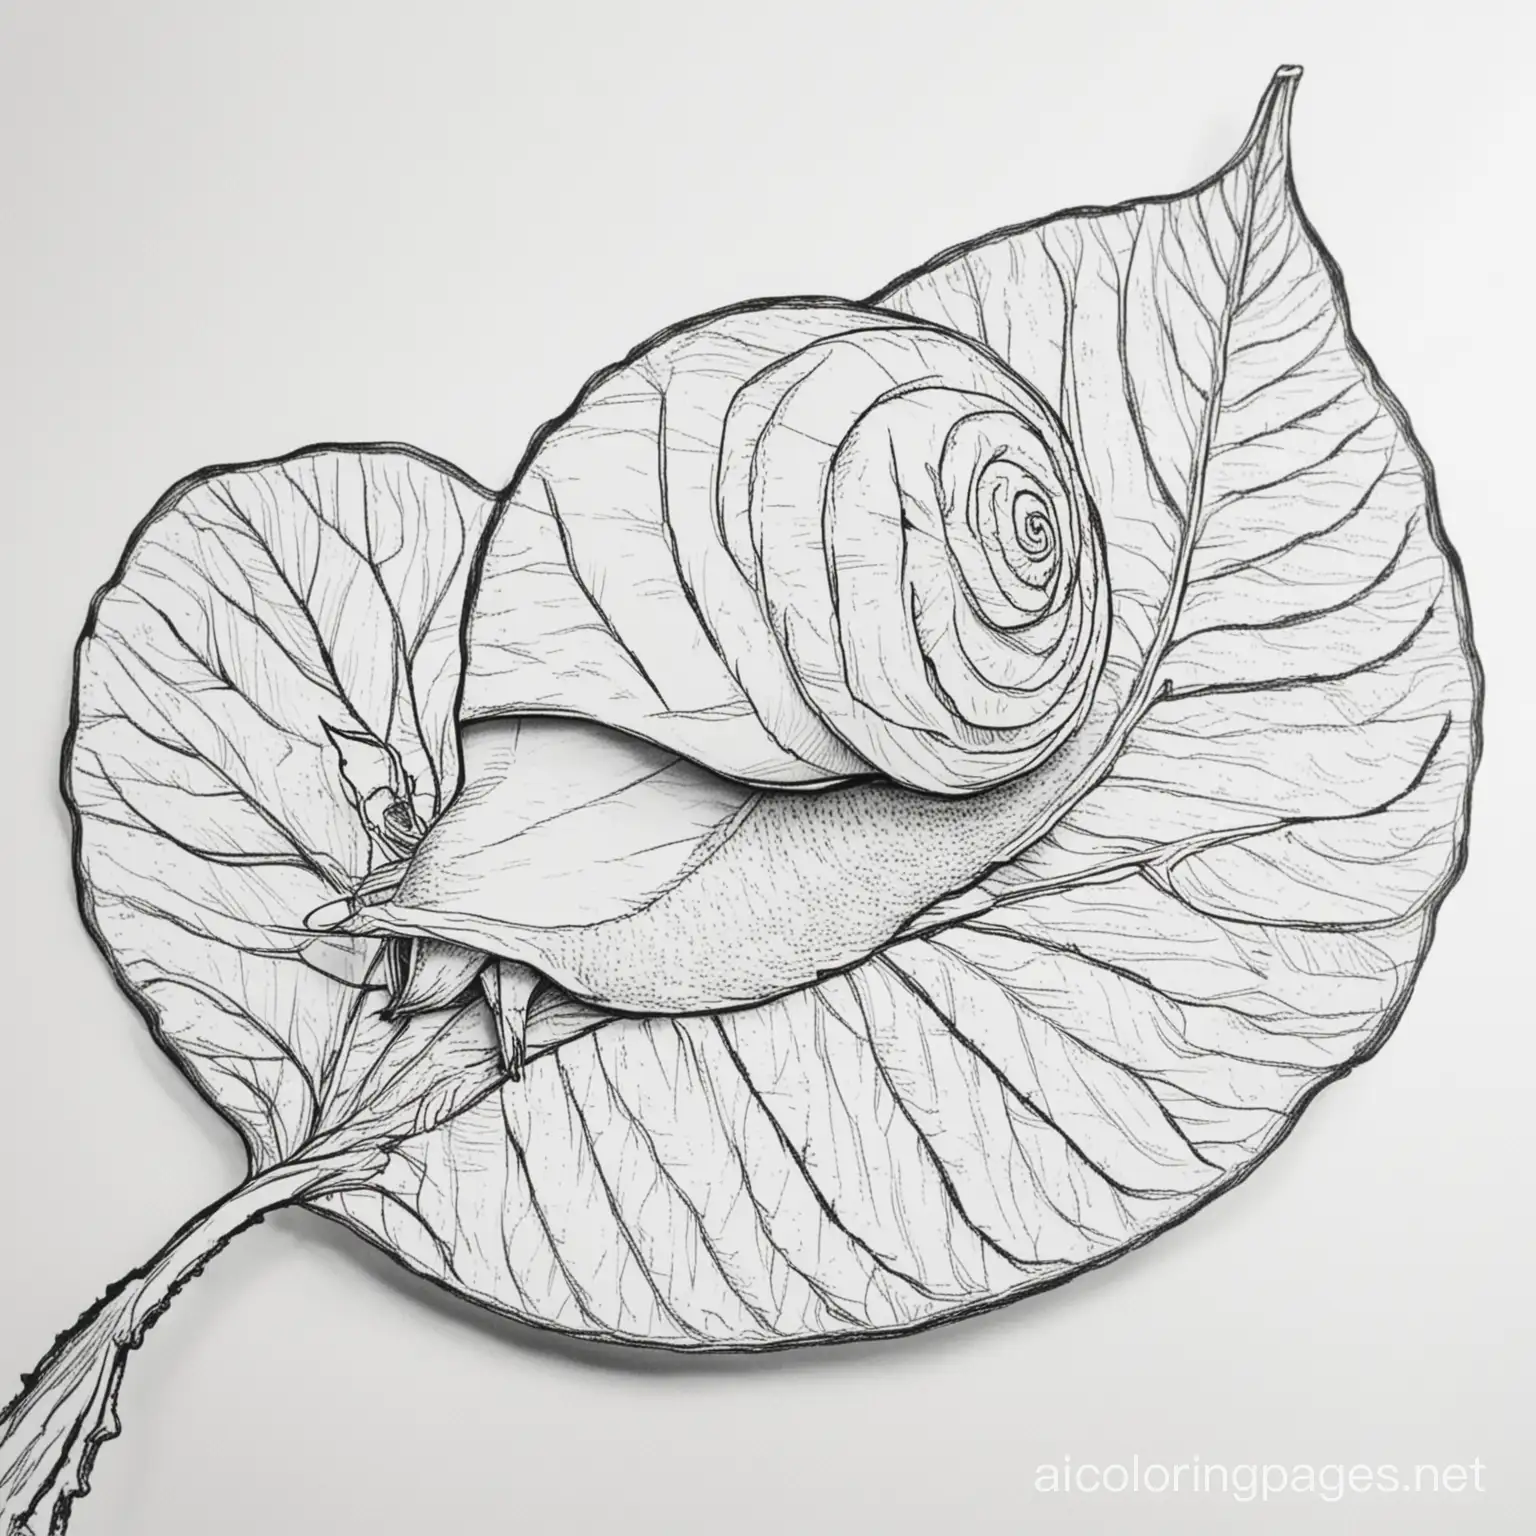 snail on leaf, Coloring Page, black and white, line art, white background, Simplicity, Ample White Space. The background of the coloring page is plain white to make it easy for young children to color within the lines. The outlines of all the subjects are easy to distinguish, making it simple for kids to color without too much difficulty